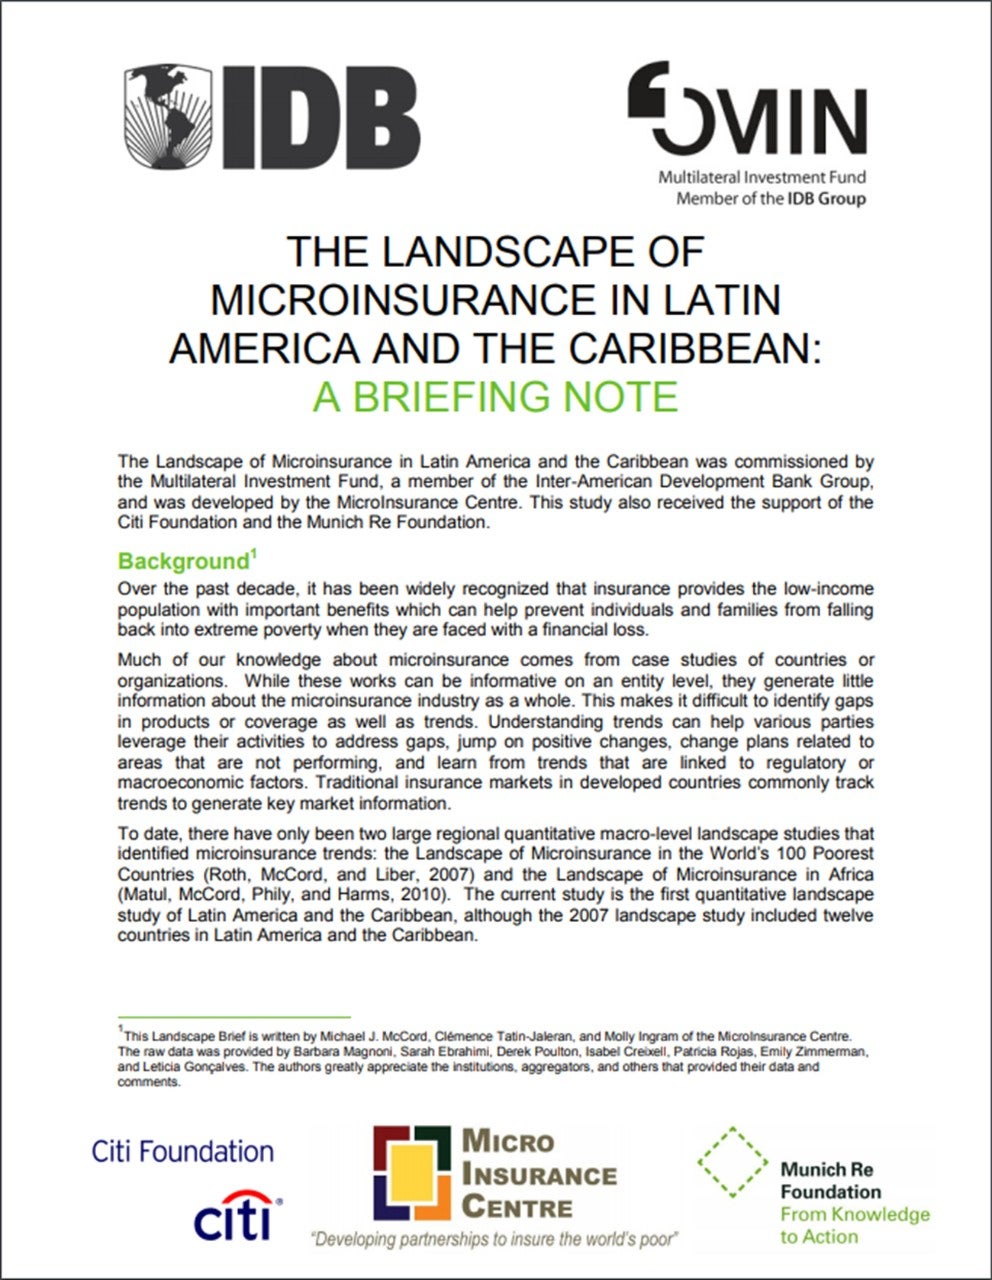 The Landscape of Microinsurance in Latin America and the Caribbean